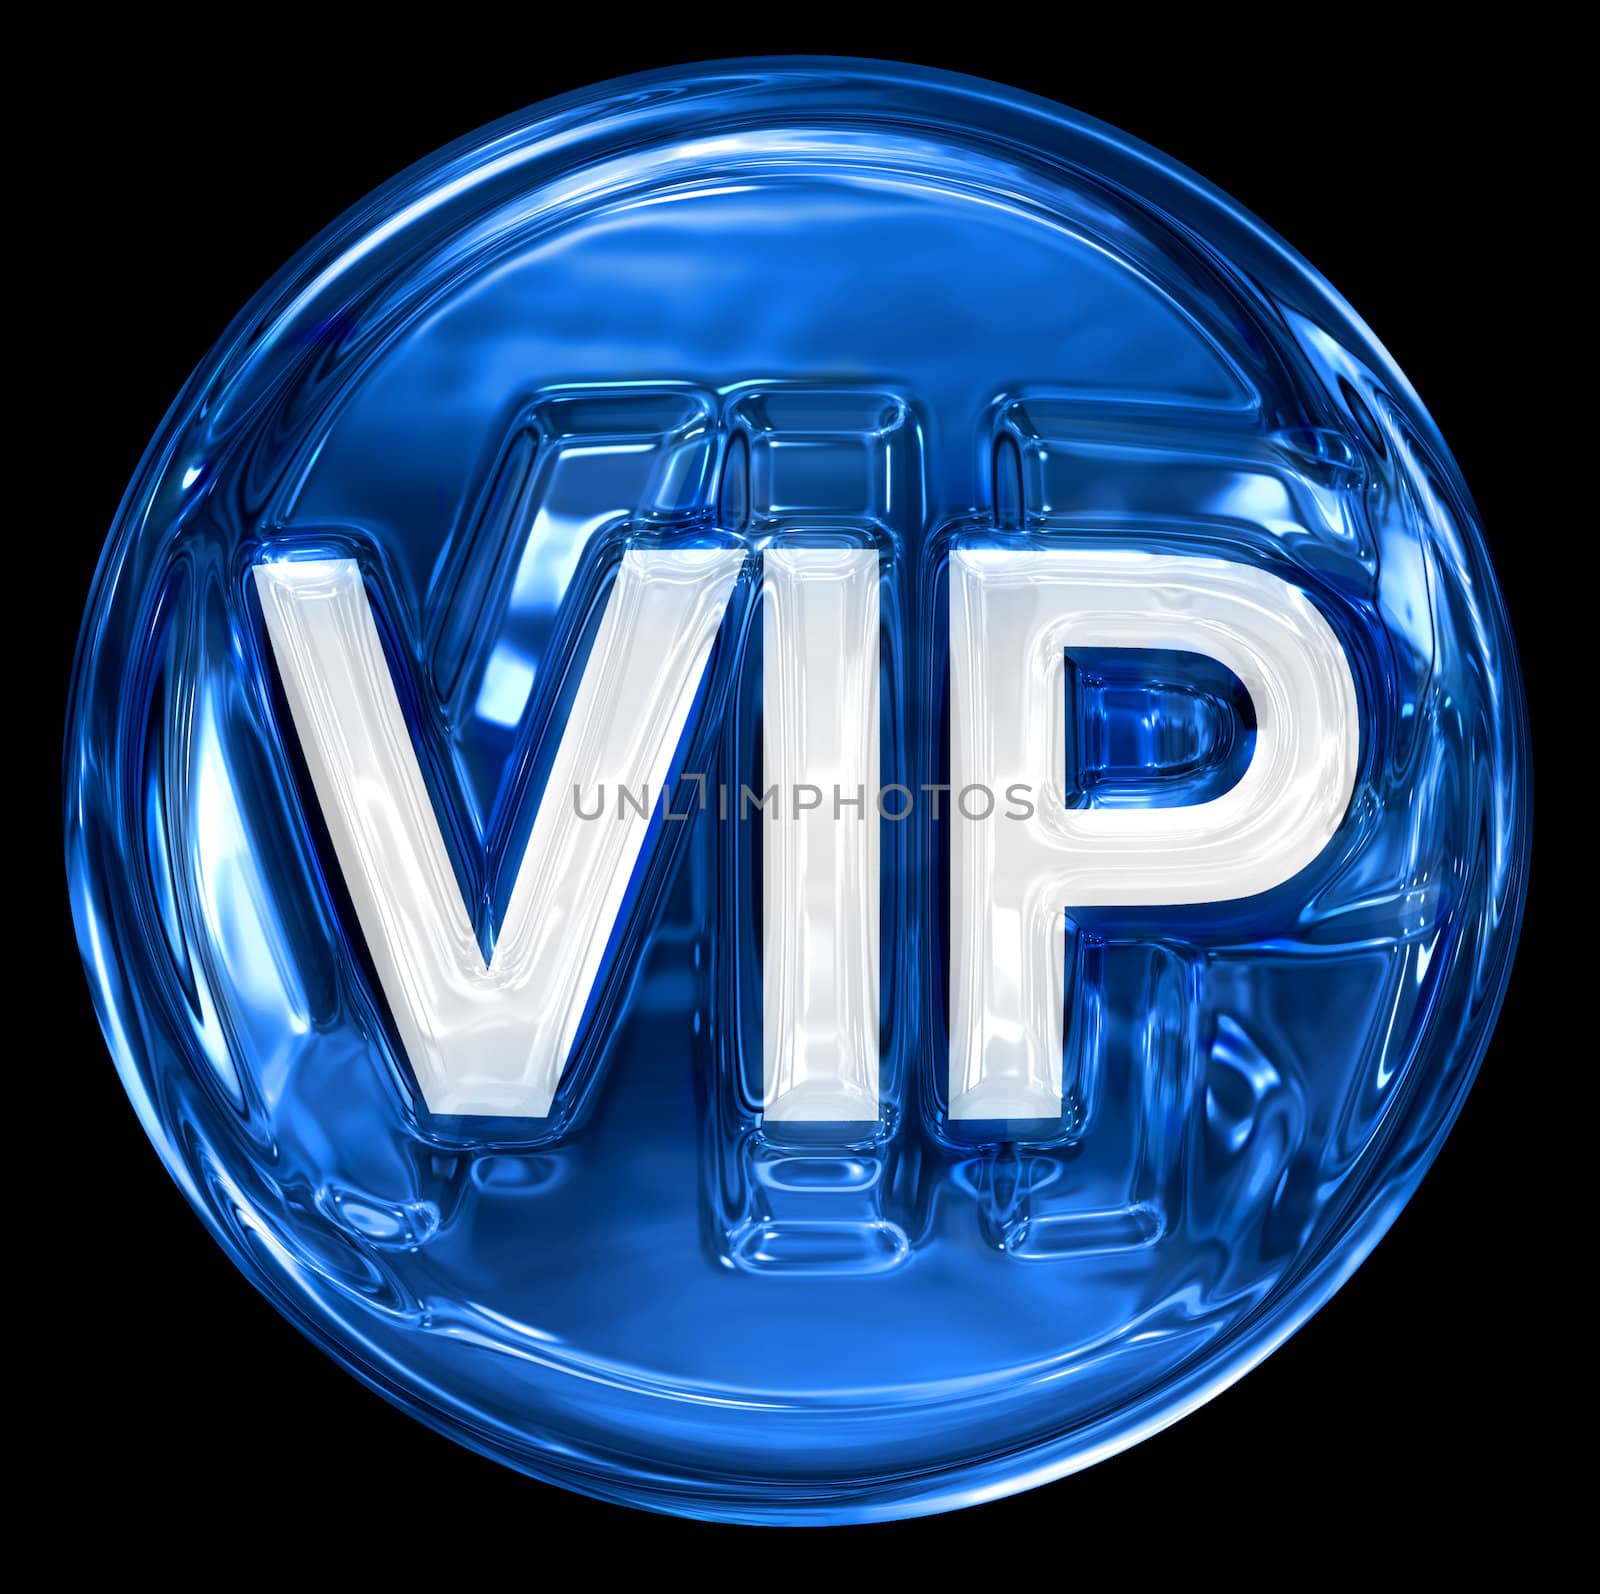 VIP icon blue, isolated on black background.